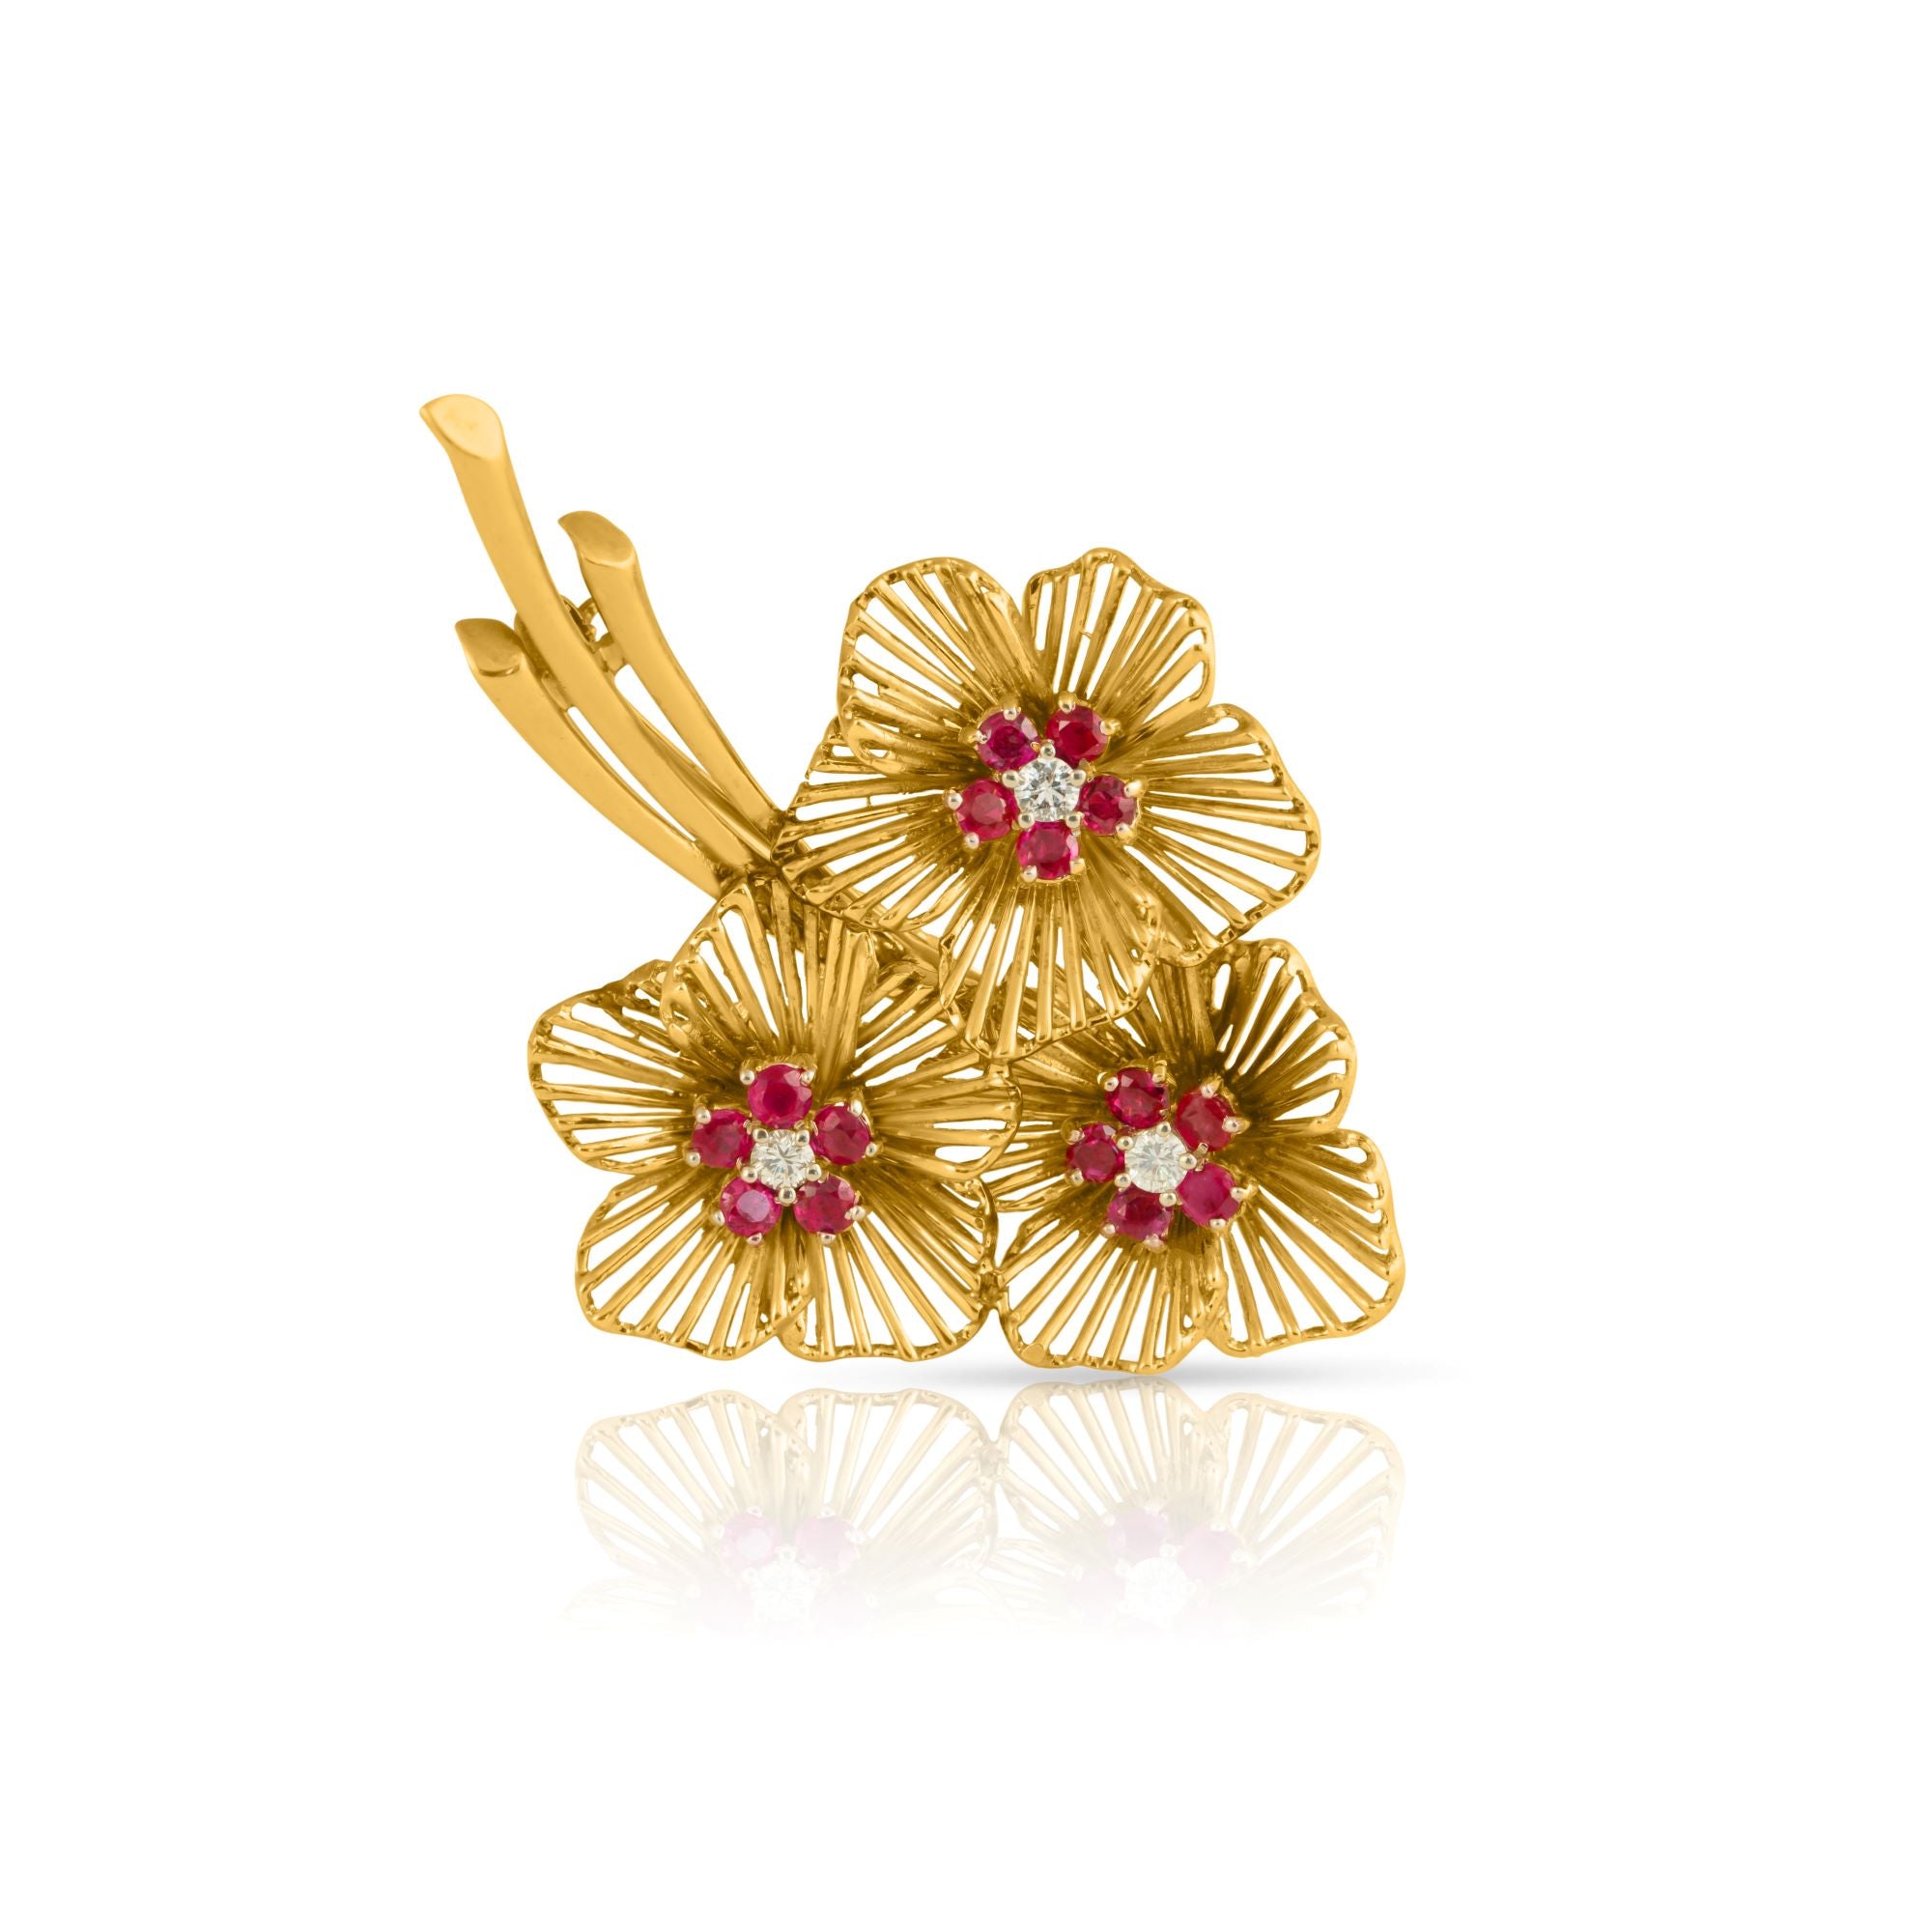 Retro Gold Ruby and Diamond Floral Earring and Brooch Set